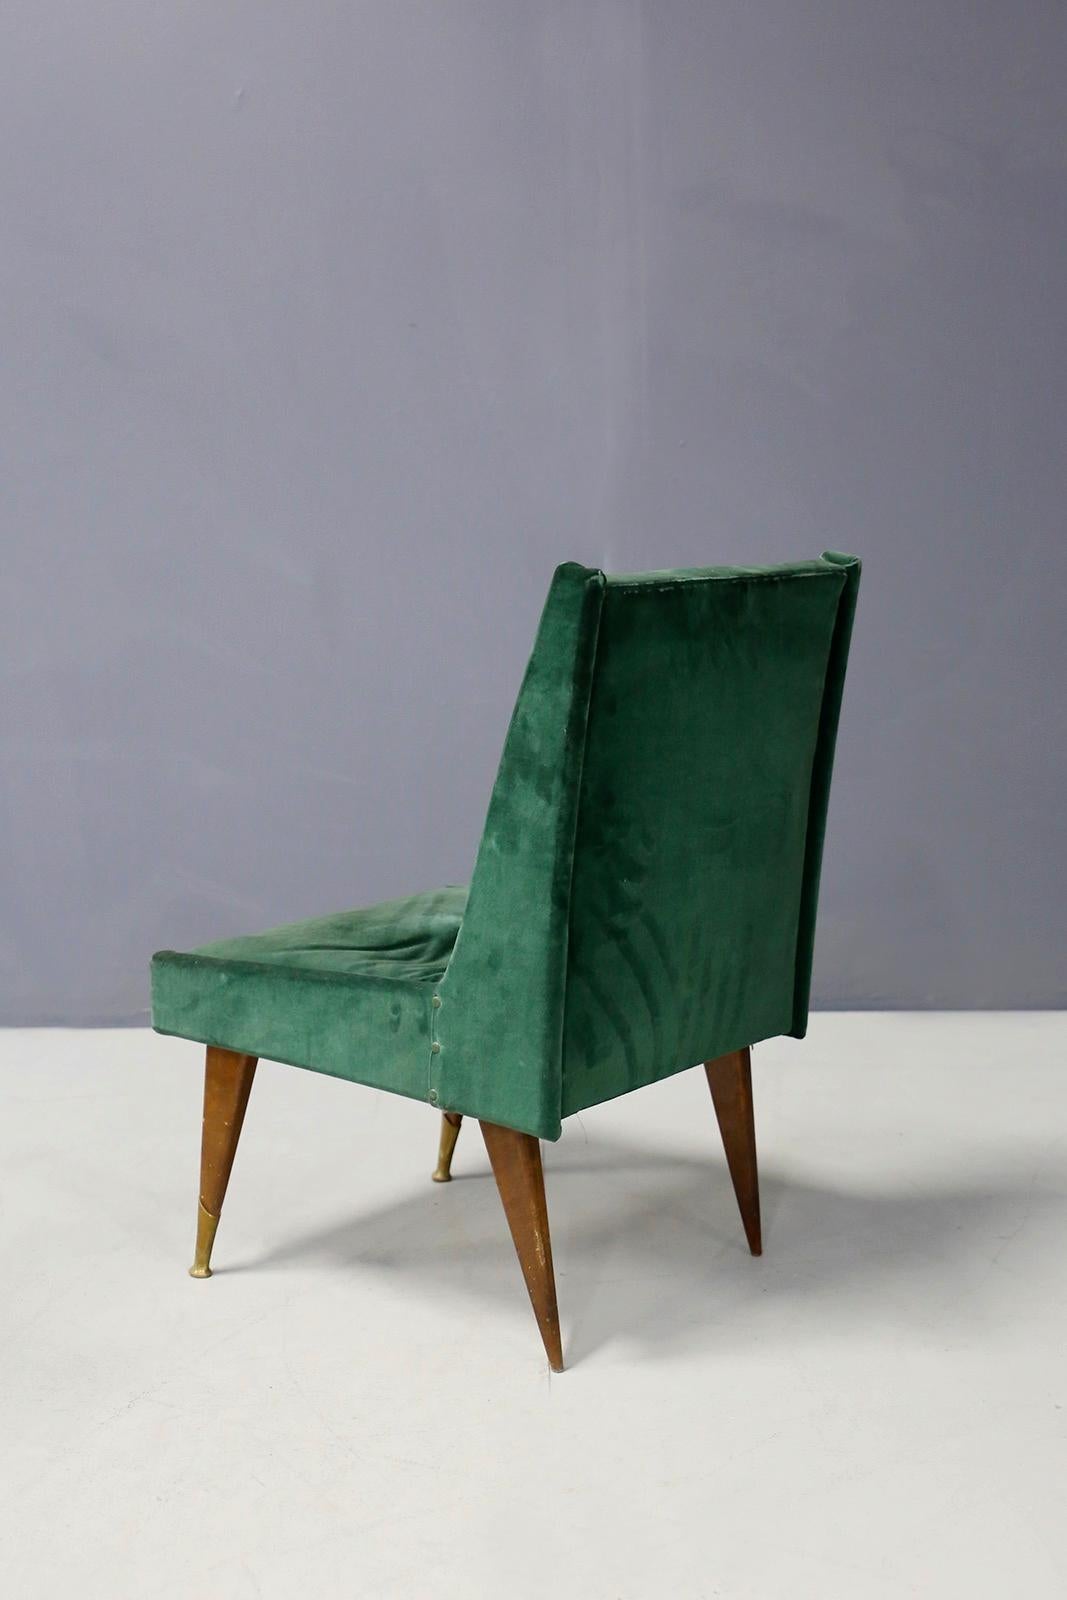 Pair of Italian armchairs designed by Carlo Pagano in 1950. The pair is in its original condition of the time. It is covered in green velvet of the time. Its feet are triangular in shape and at the front we see two brass tips. Its seat and back